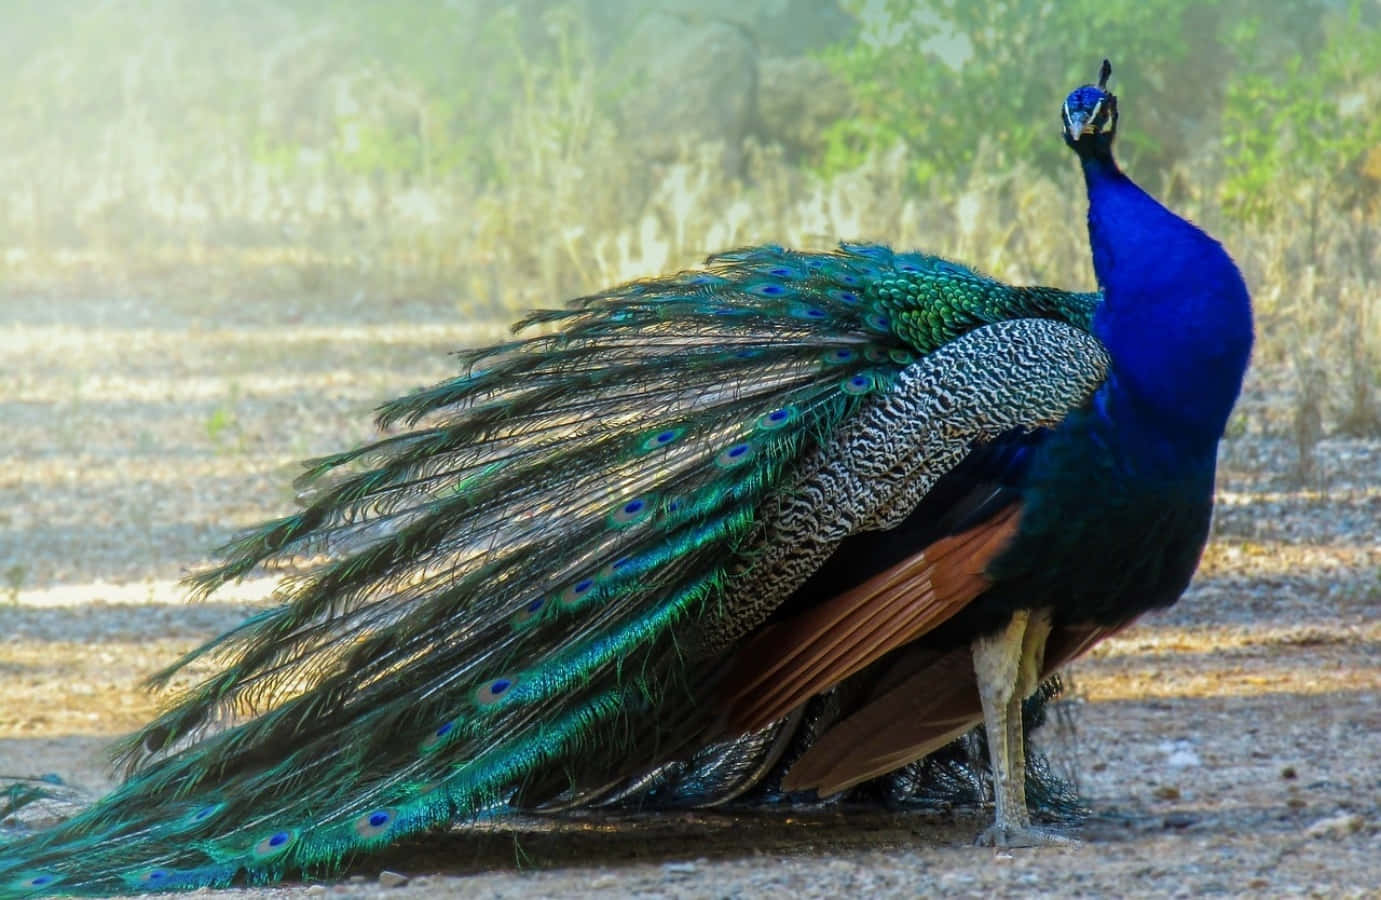 Peacock With Its Feathers Spread Out In The Sun